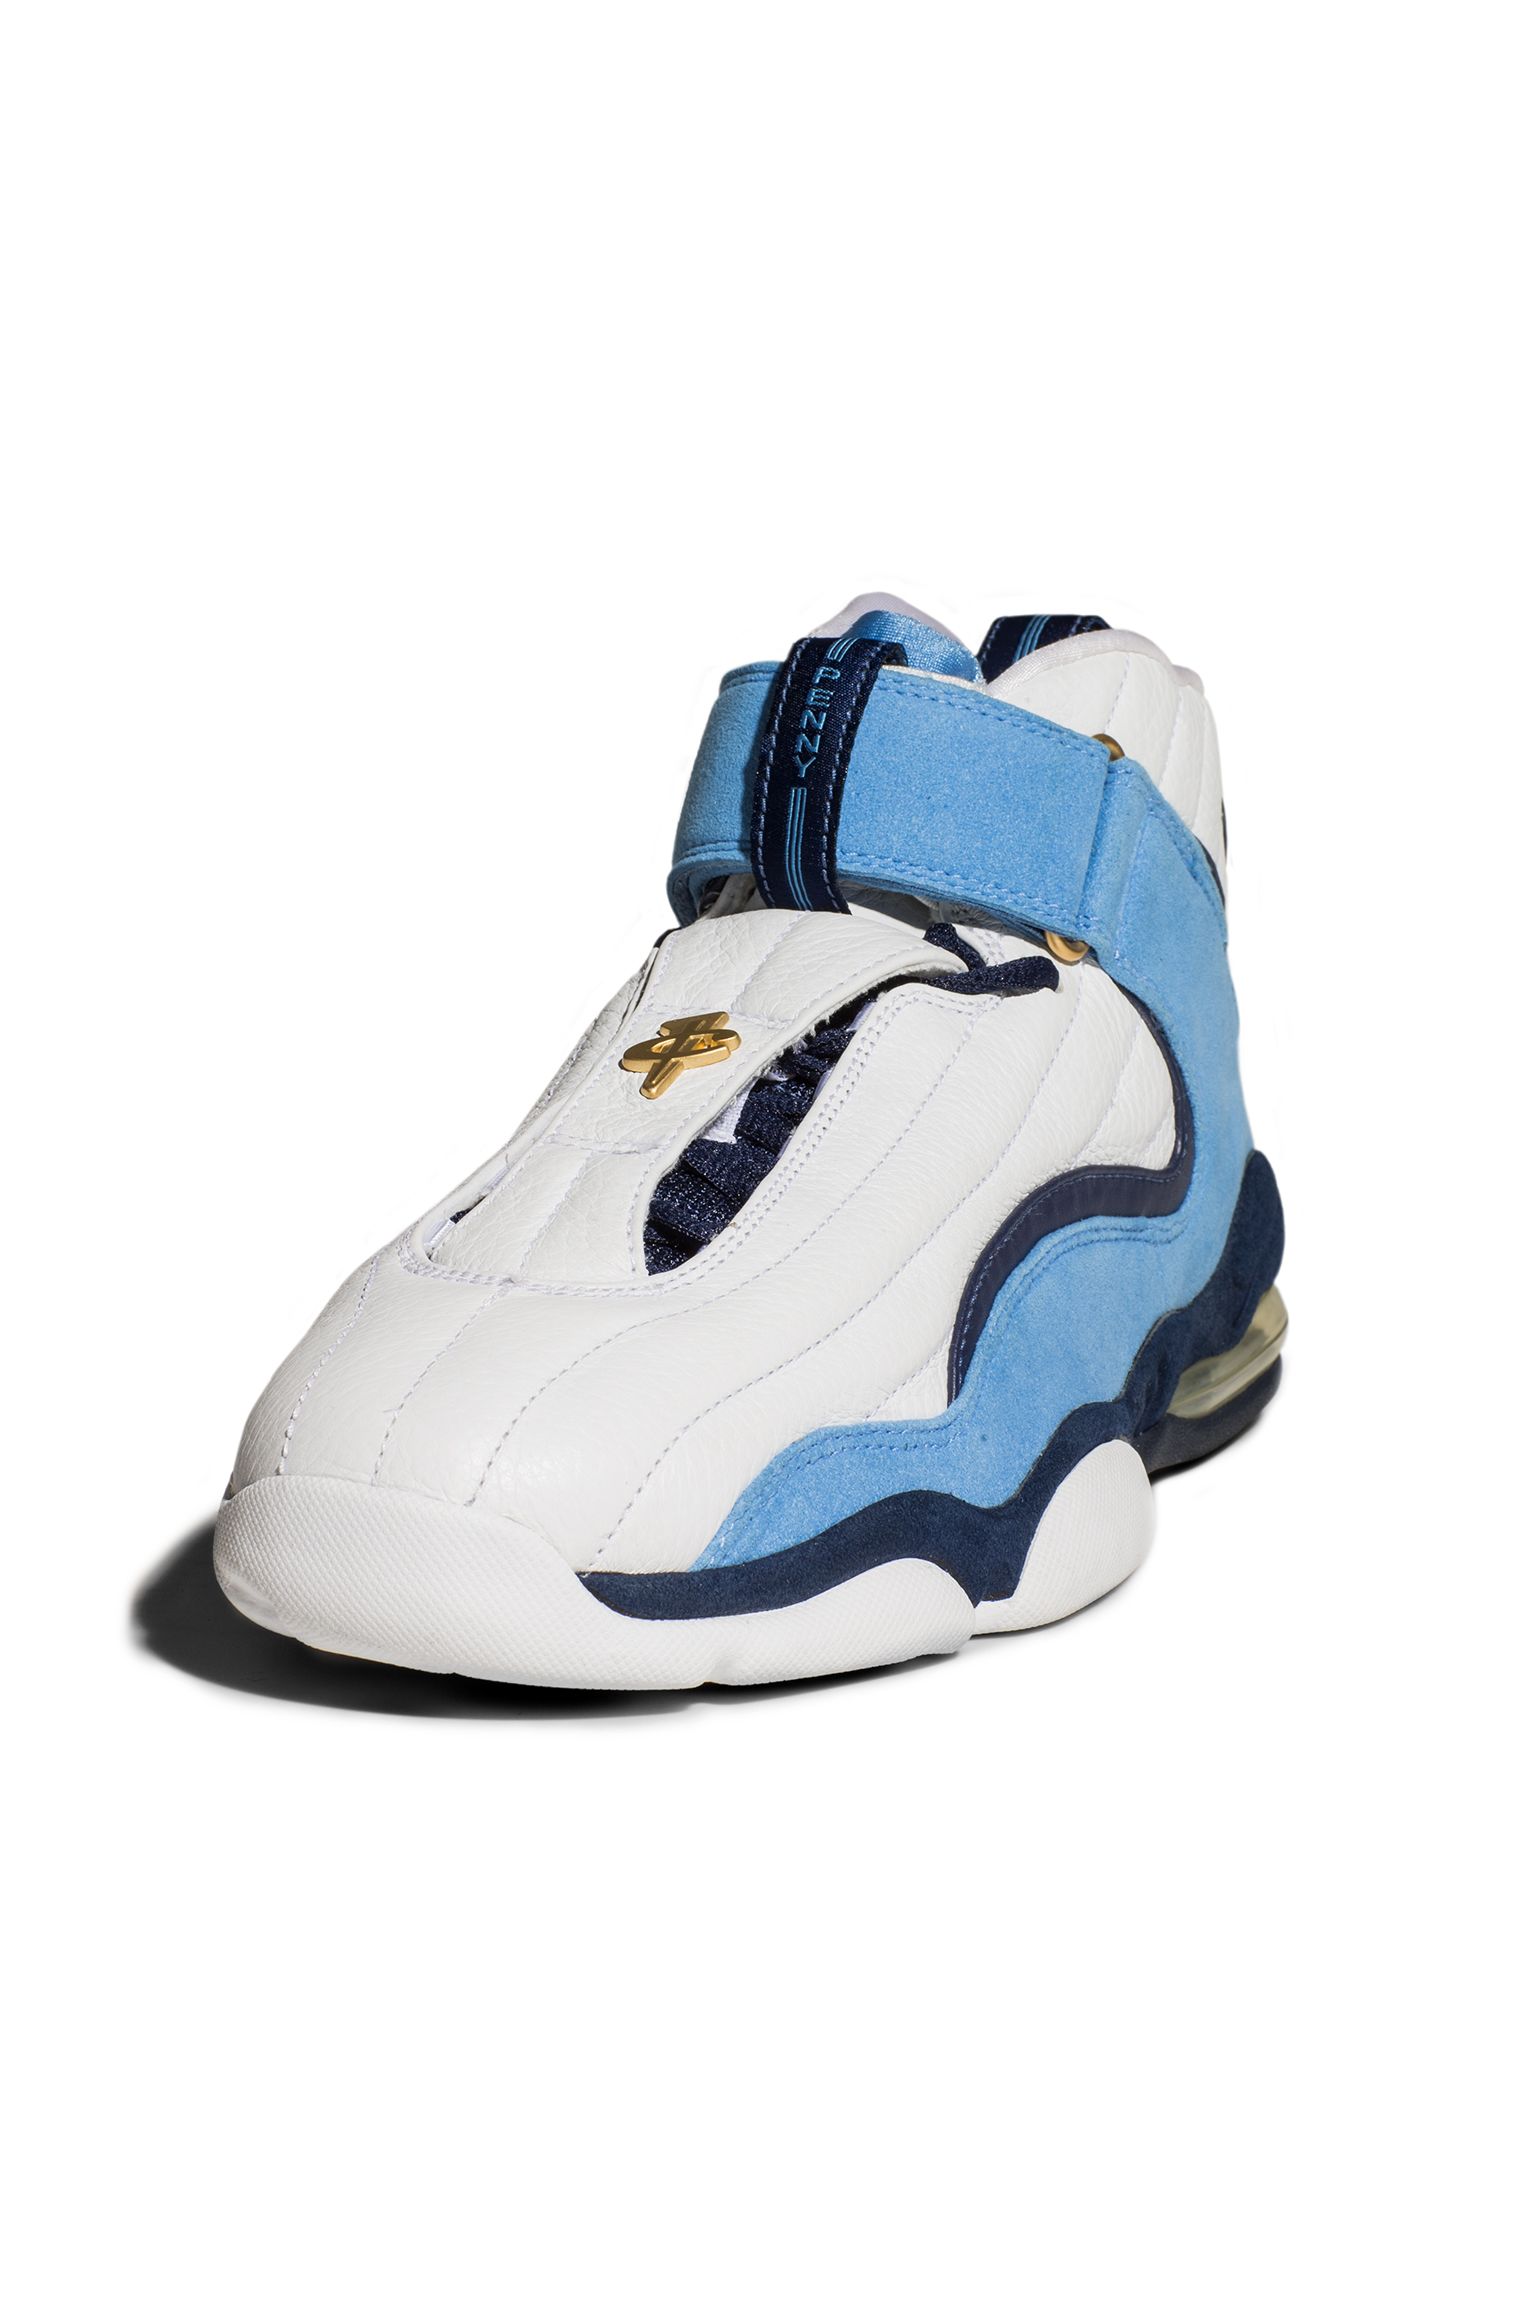 The Vault: Nike Air Penny IV. Nike SNKRS